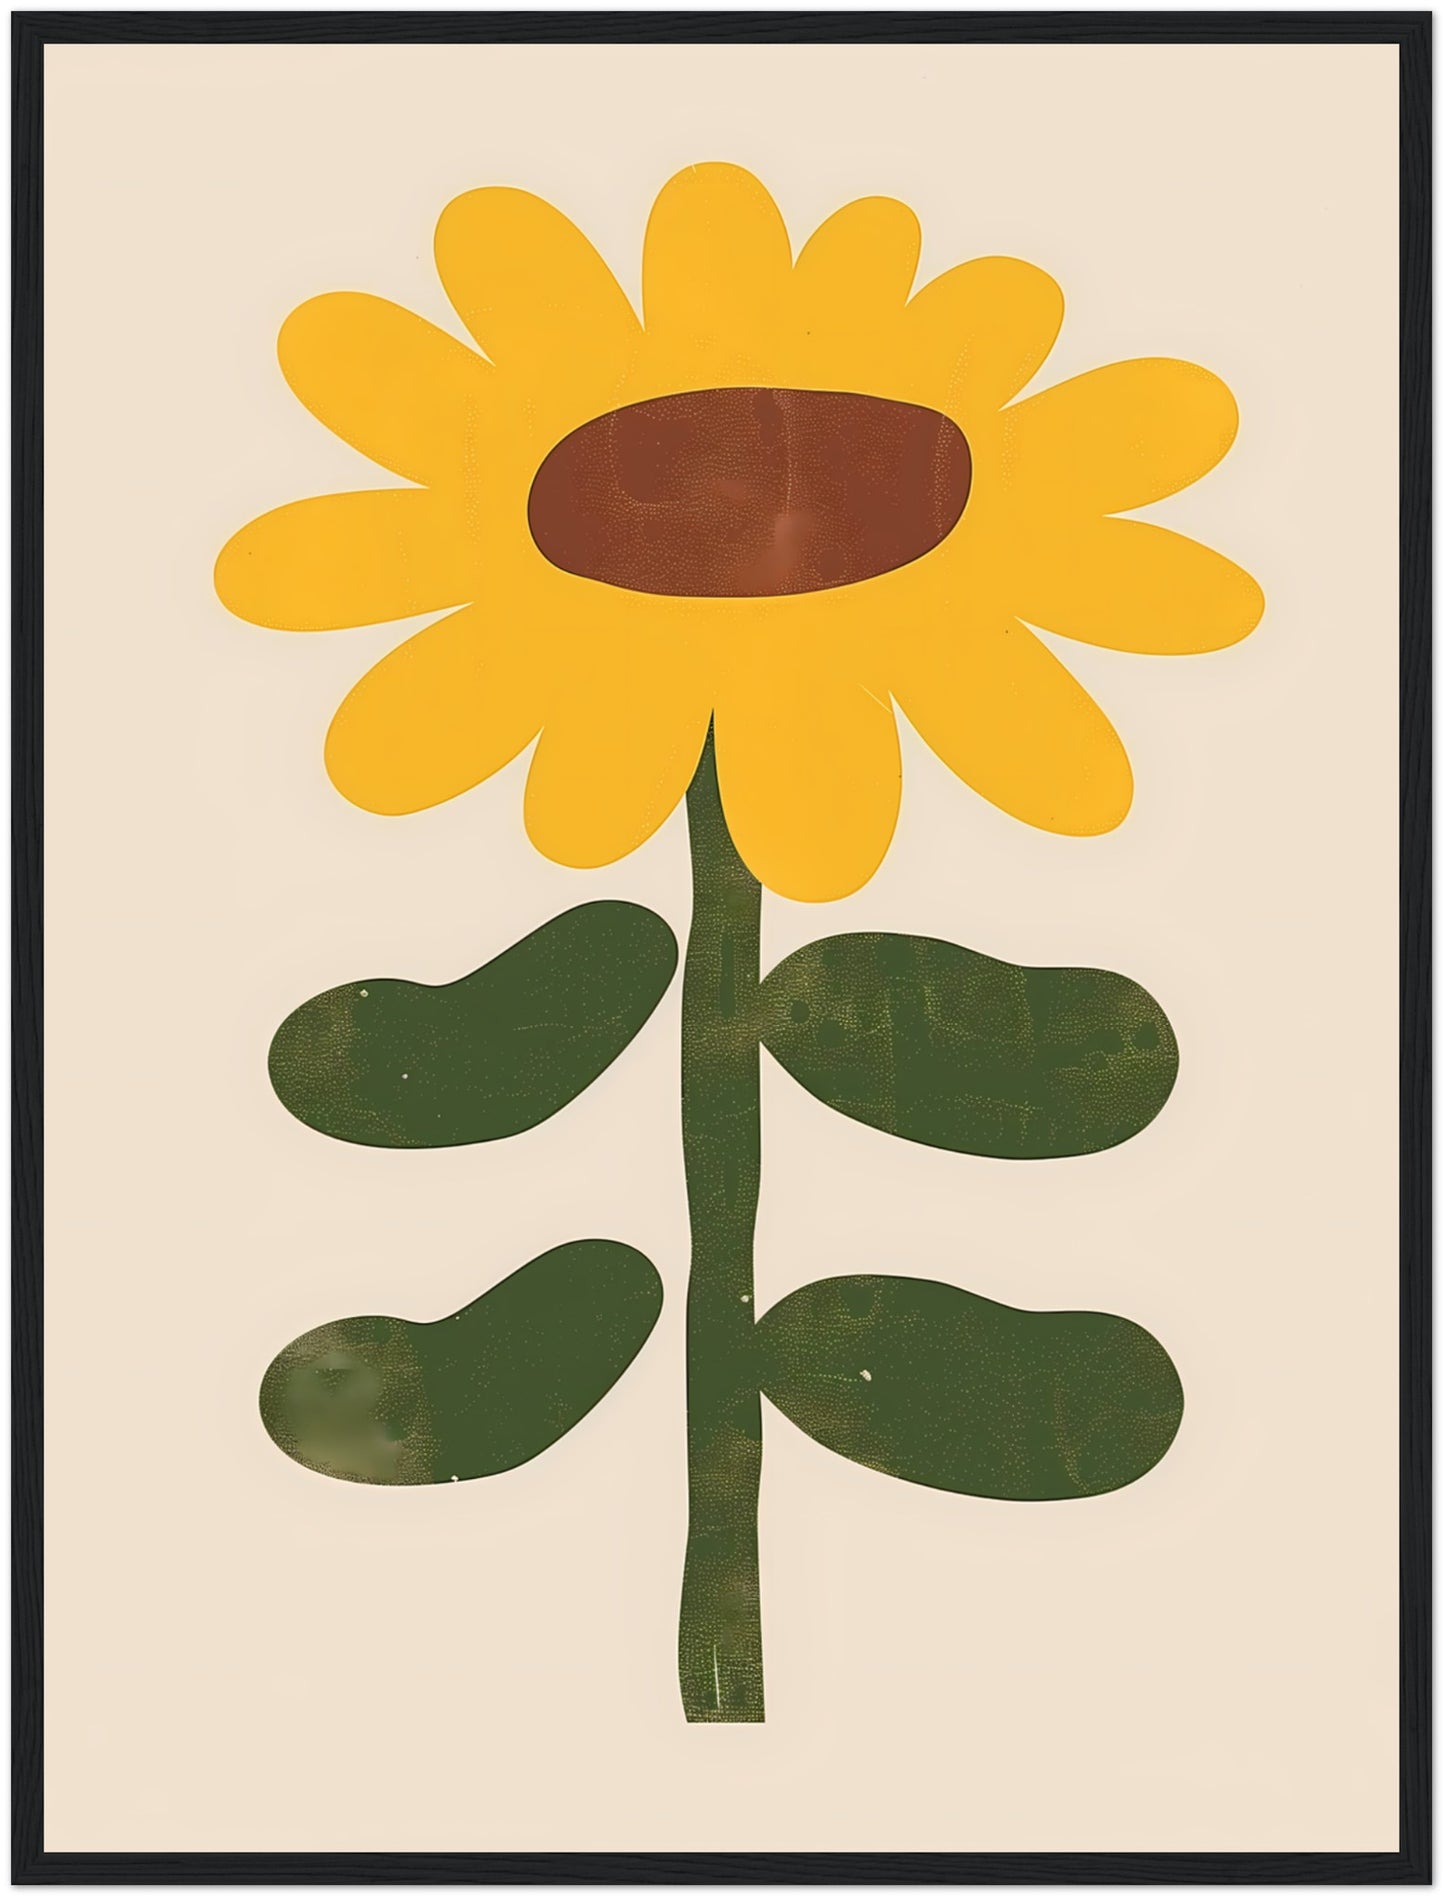 A framed illustration of a simple, stylized yellow sunflower with green leaves.